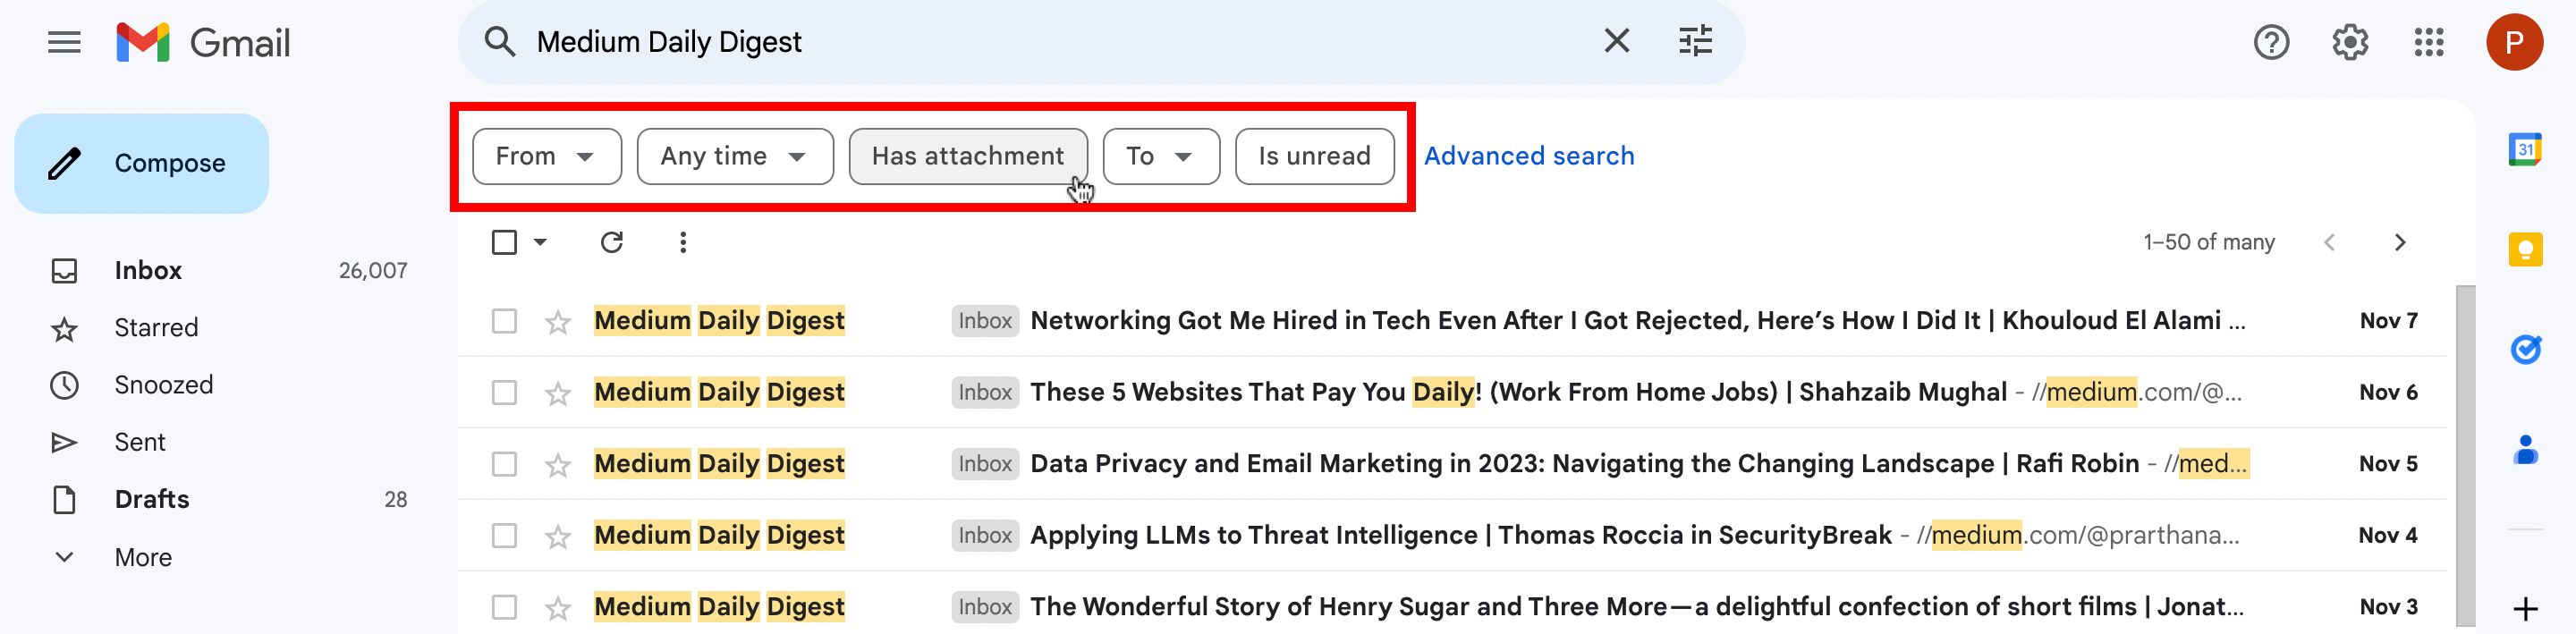 Gmail chips that help users look up relevant emails